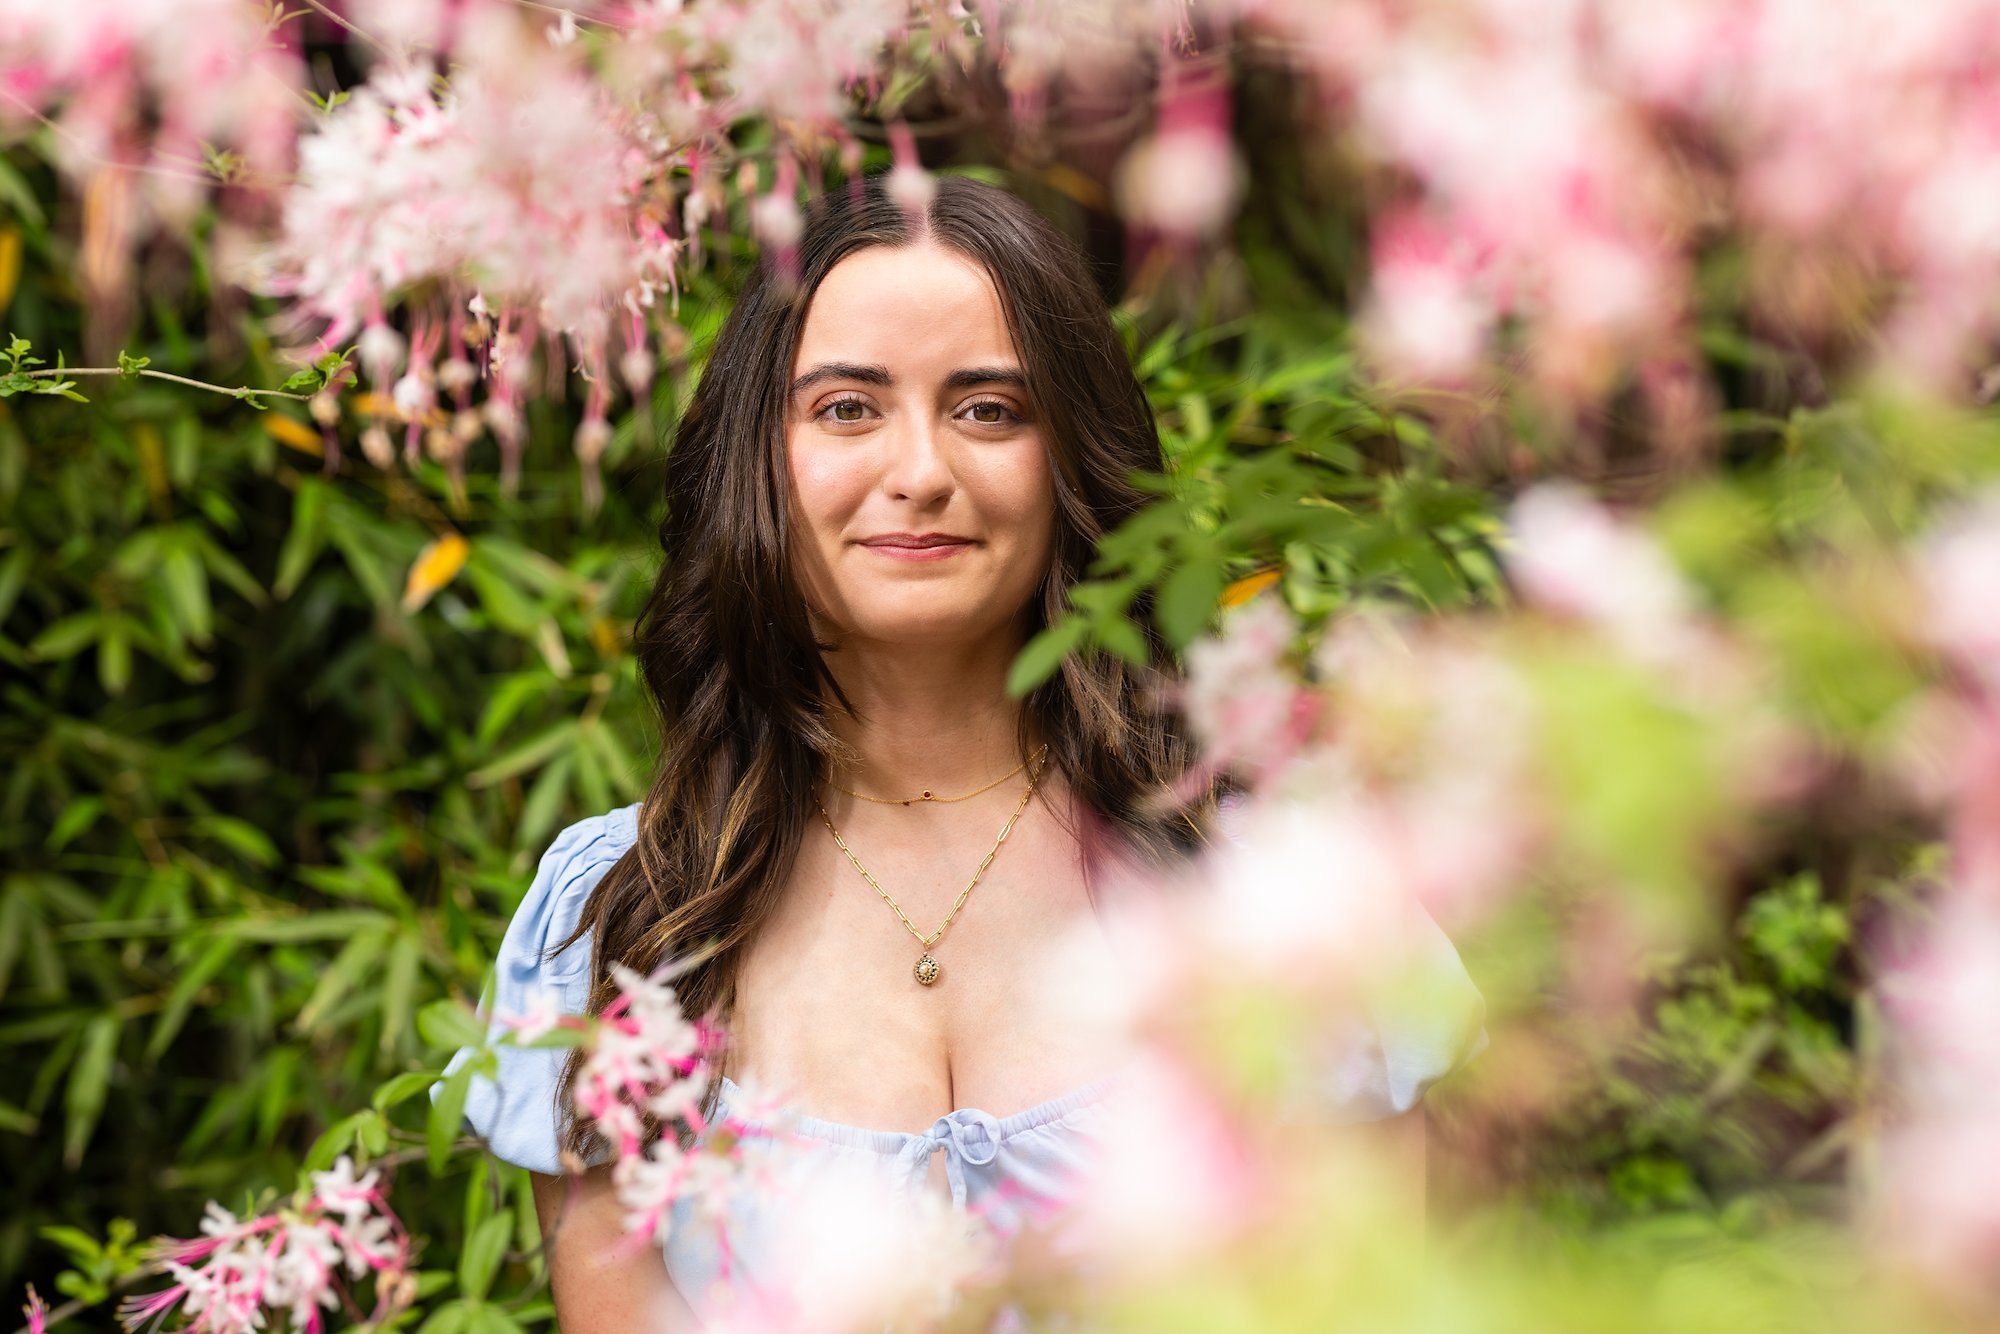 A white, woman with long dark, middle-parted hair and a small, closed lip smile gazes at the camera through a circle of pink flowers and greenery in a garden.